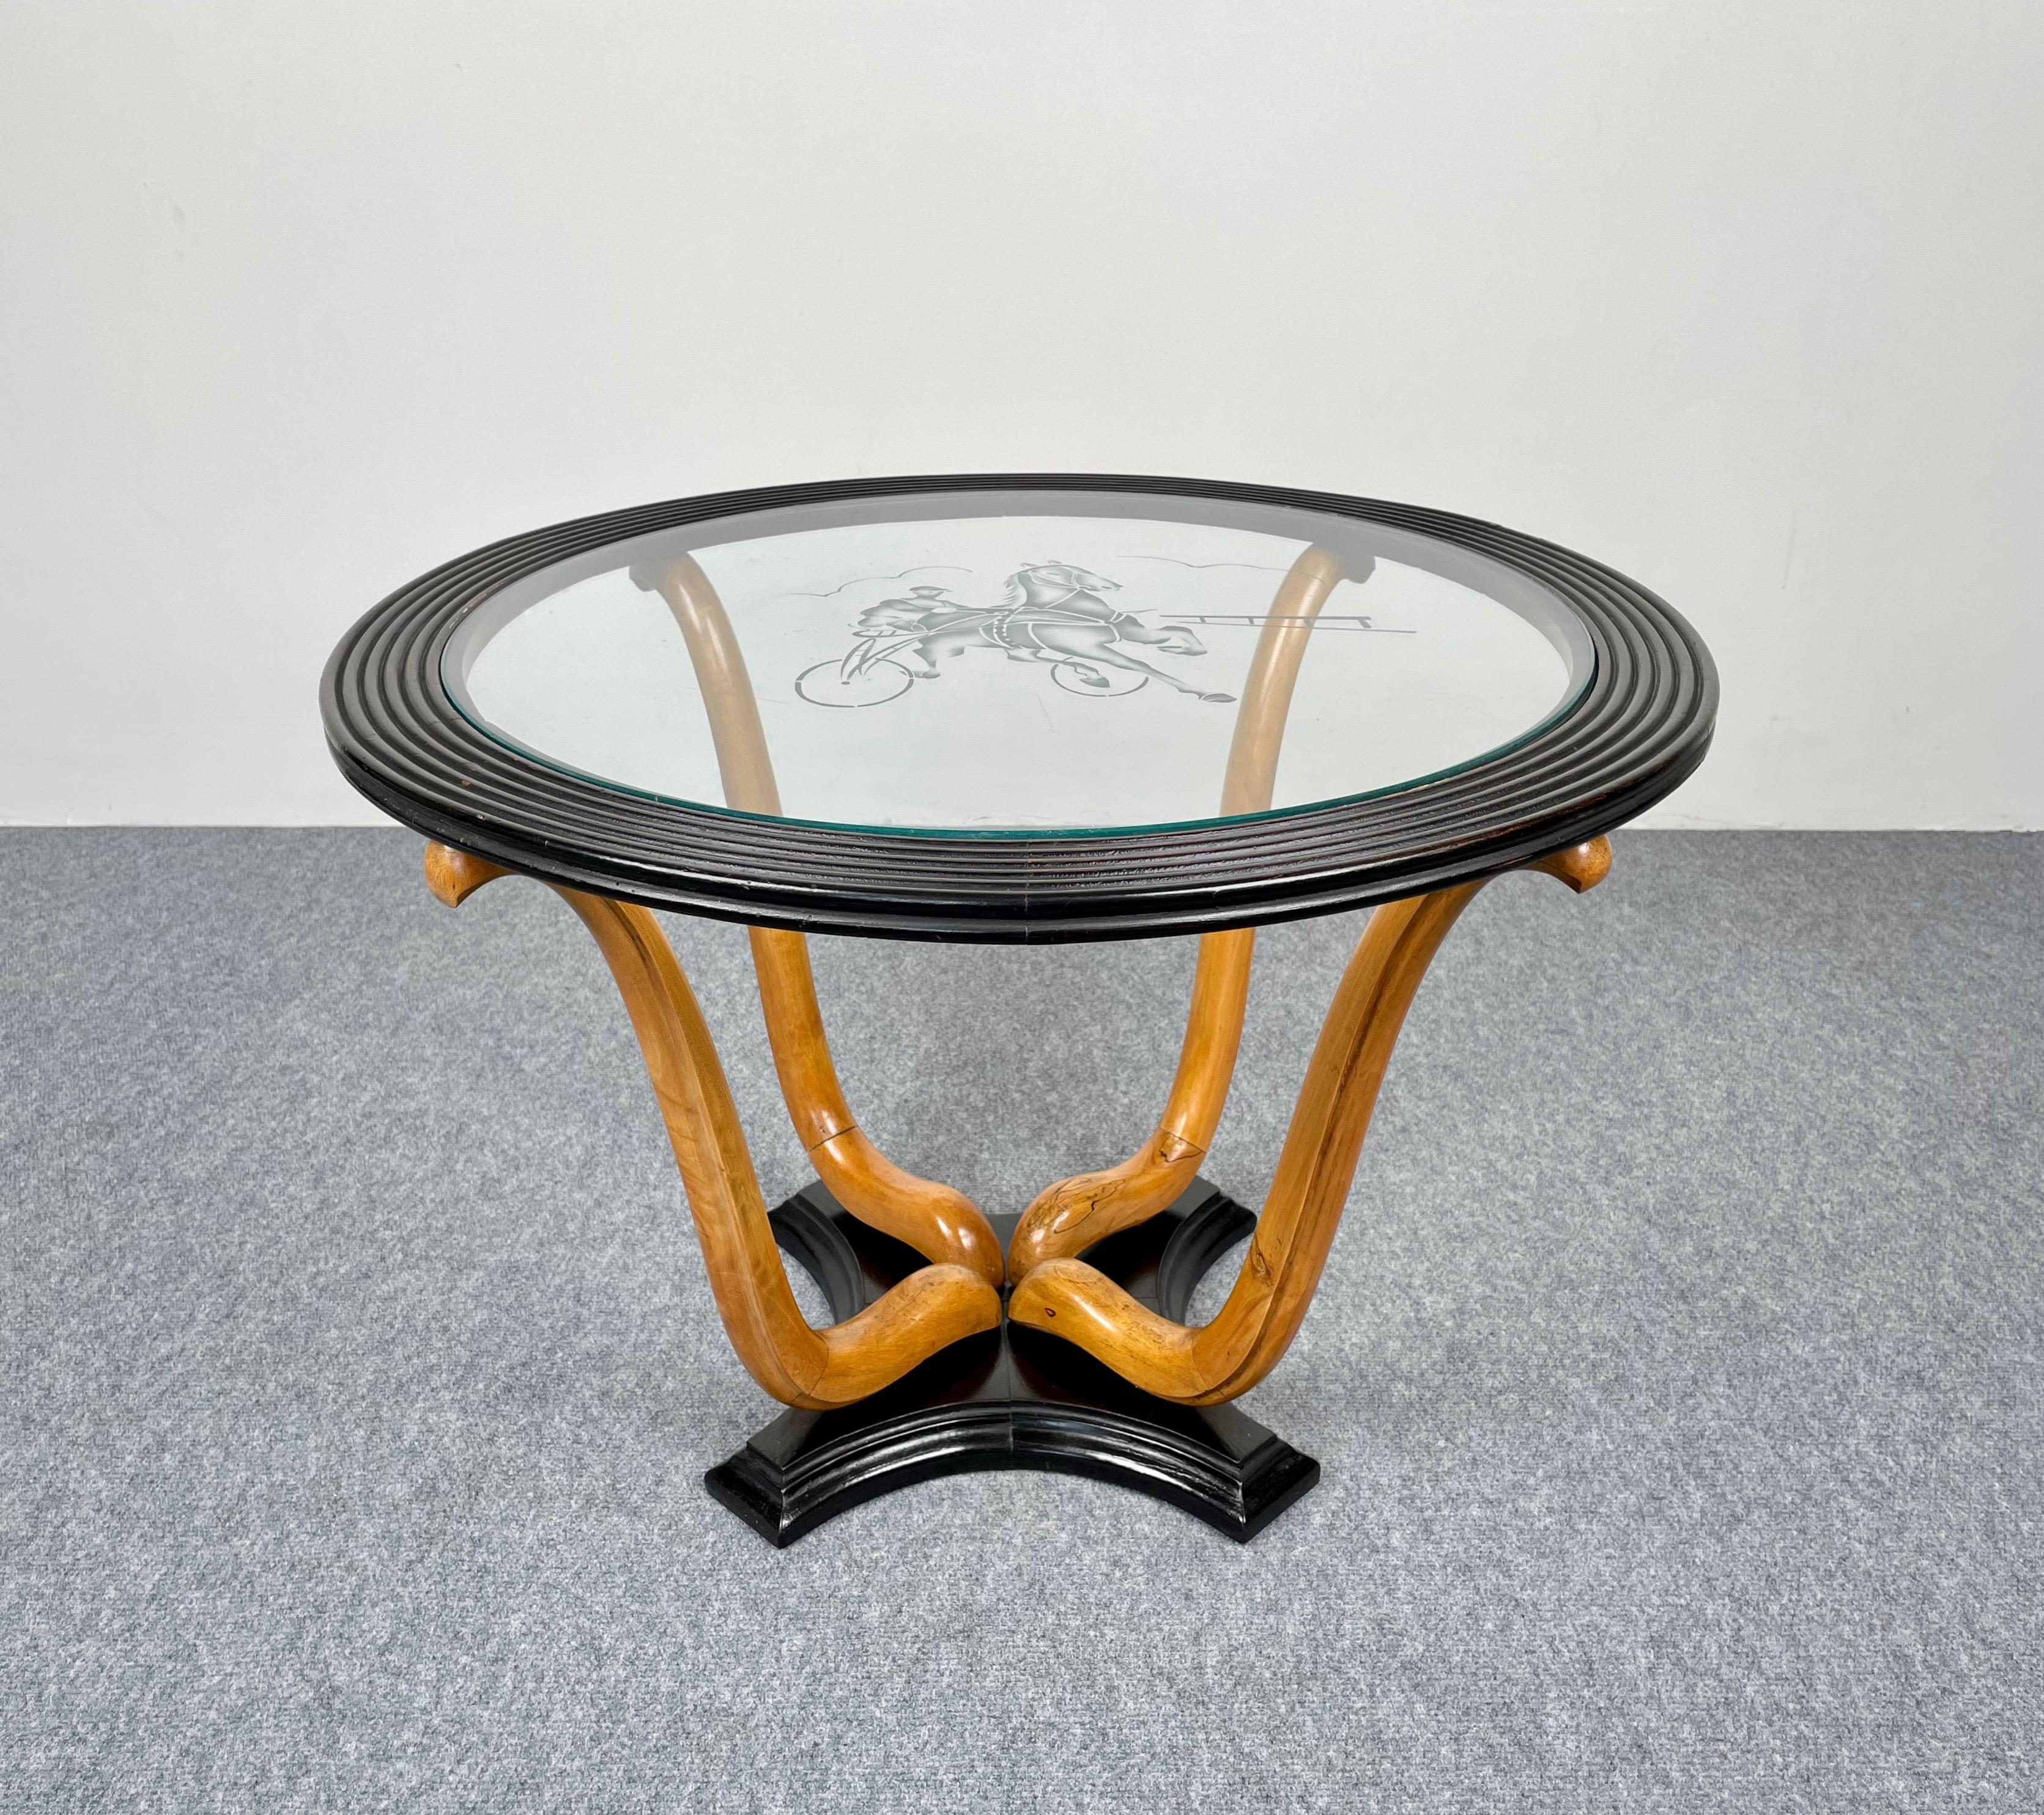 Round coffee side table featuring four hand-carved curved legs of a lighter wood on a dark wood base. The glass top is decorated with a frosted glass jockey on his horse and is framed by concentric dark wood. Made in Italy in the 1940s.